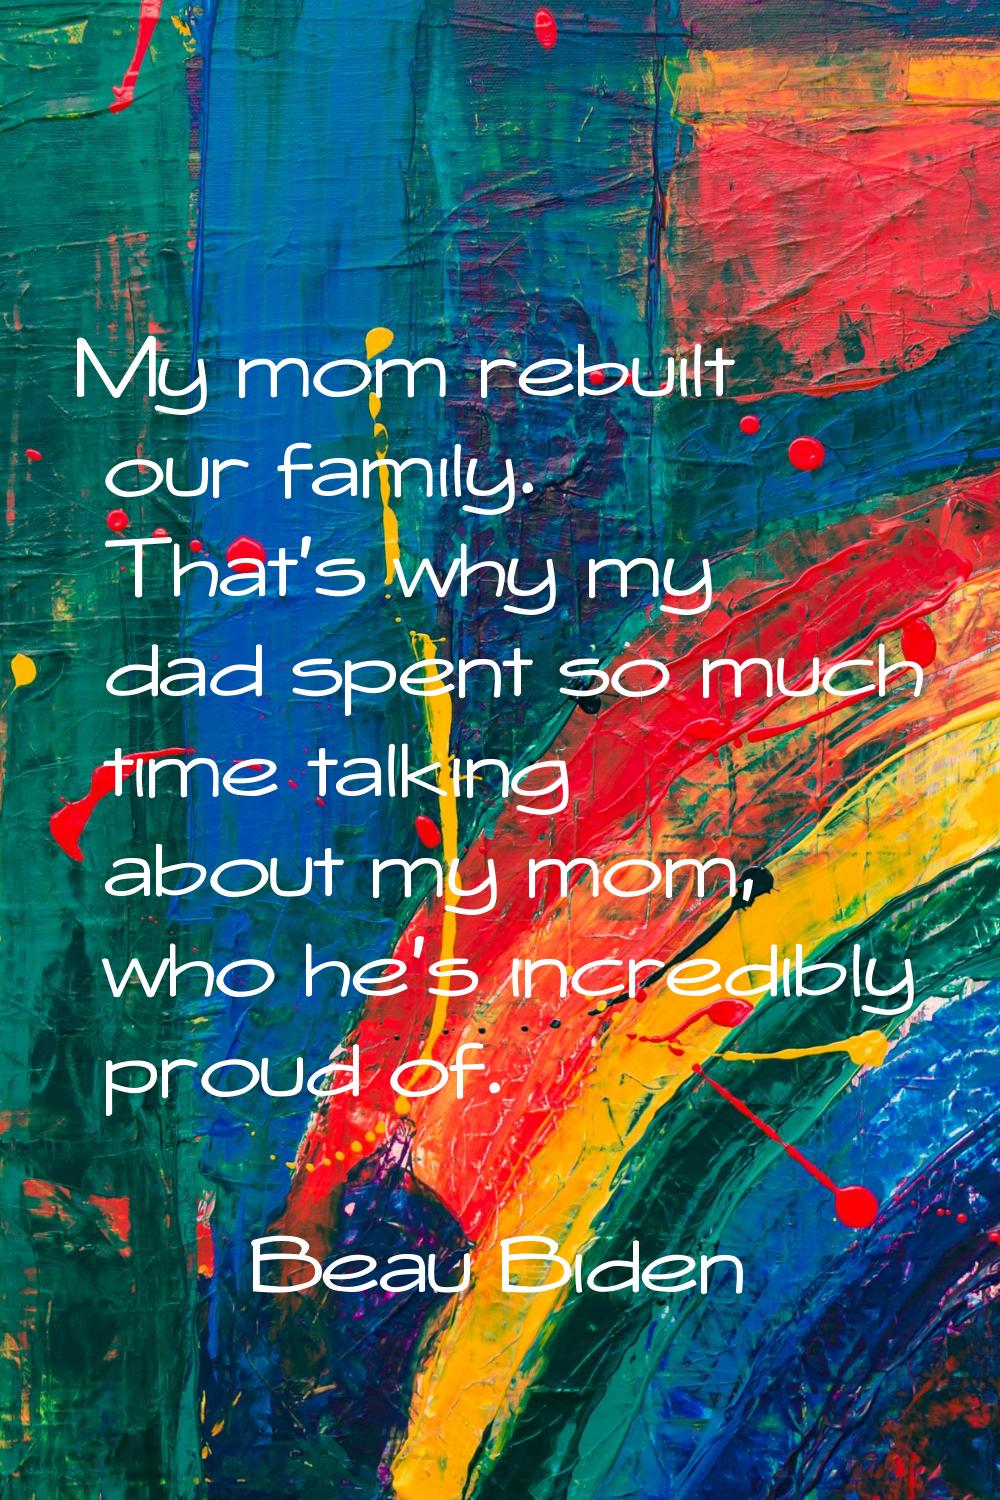 My mom rebuilt our family. That's why my dad spent so much time talking about my mom, who he's incr